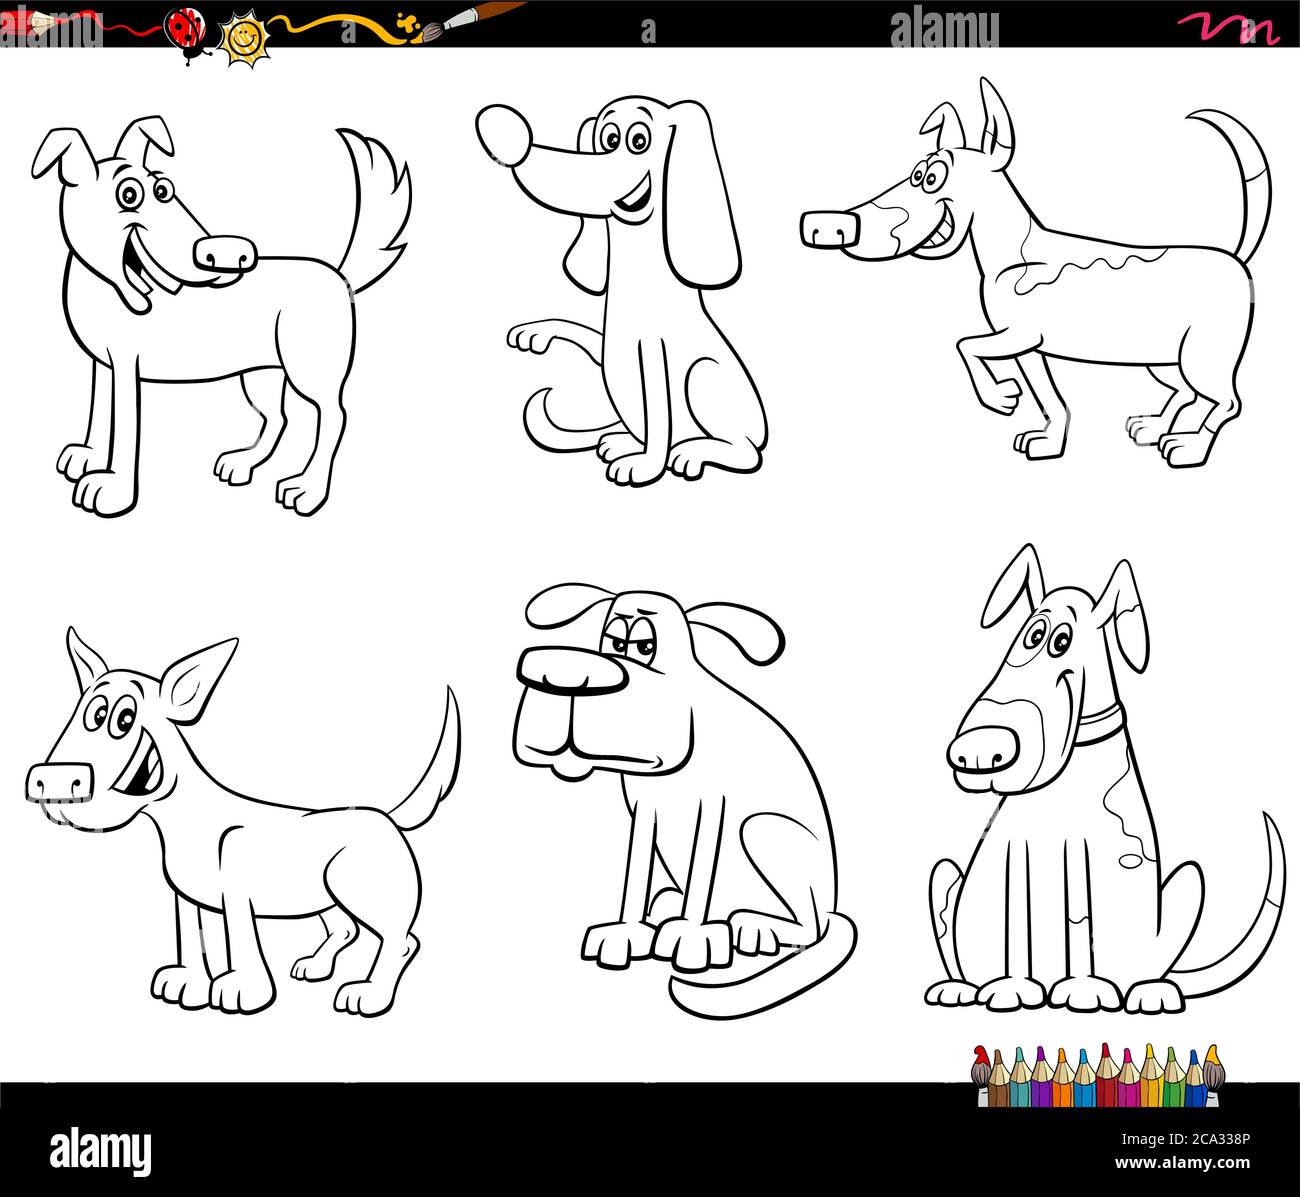 Black and White Cartoon Illustration of Funny Dogs and Puppies Comic Animal Characters Set Coloring Book Page Stock Vector